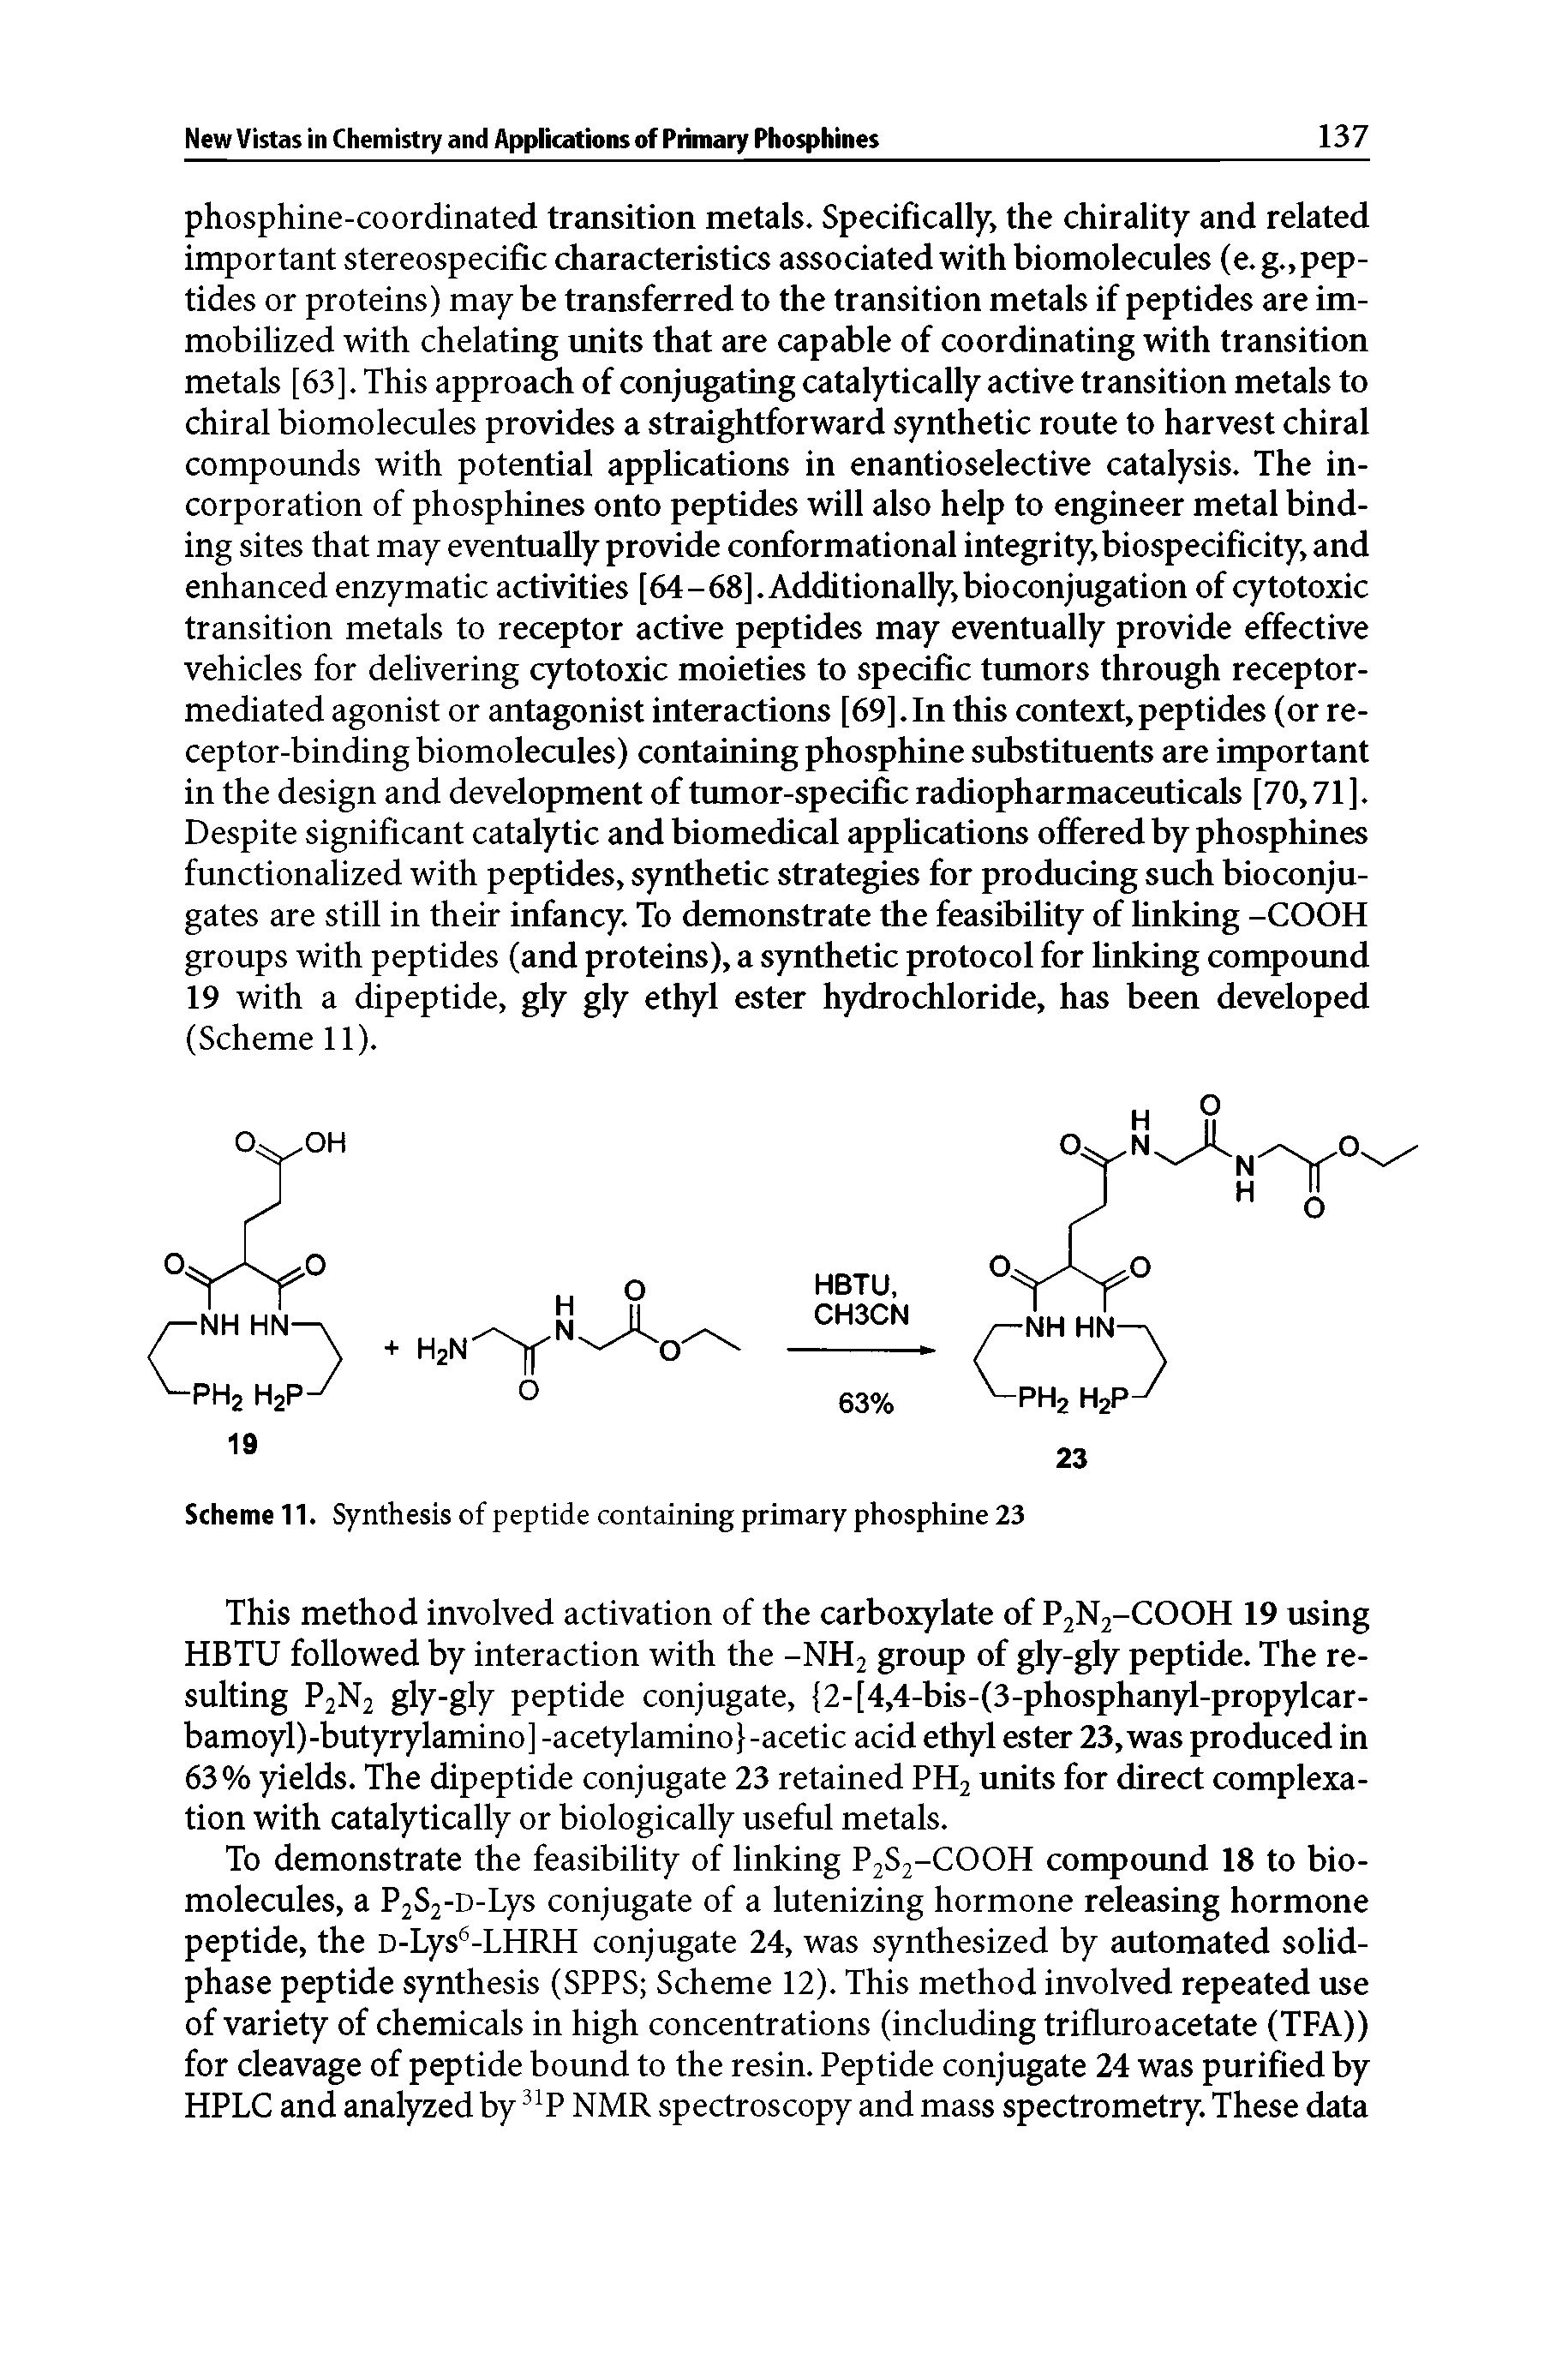 Scheme 11. Synthesis of peptide containing primary phosphine 23...